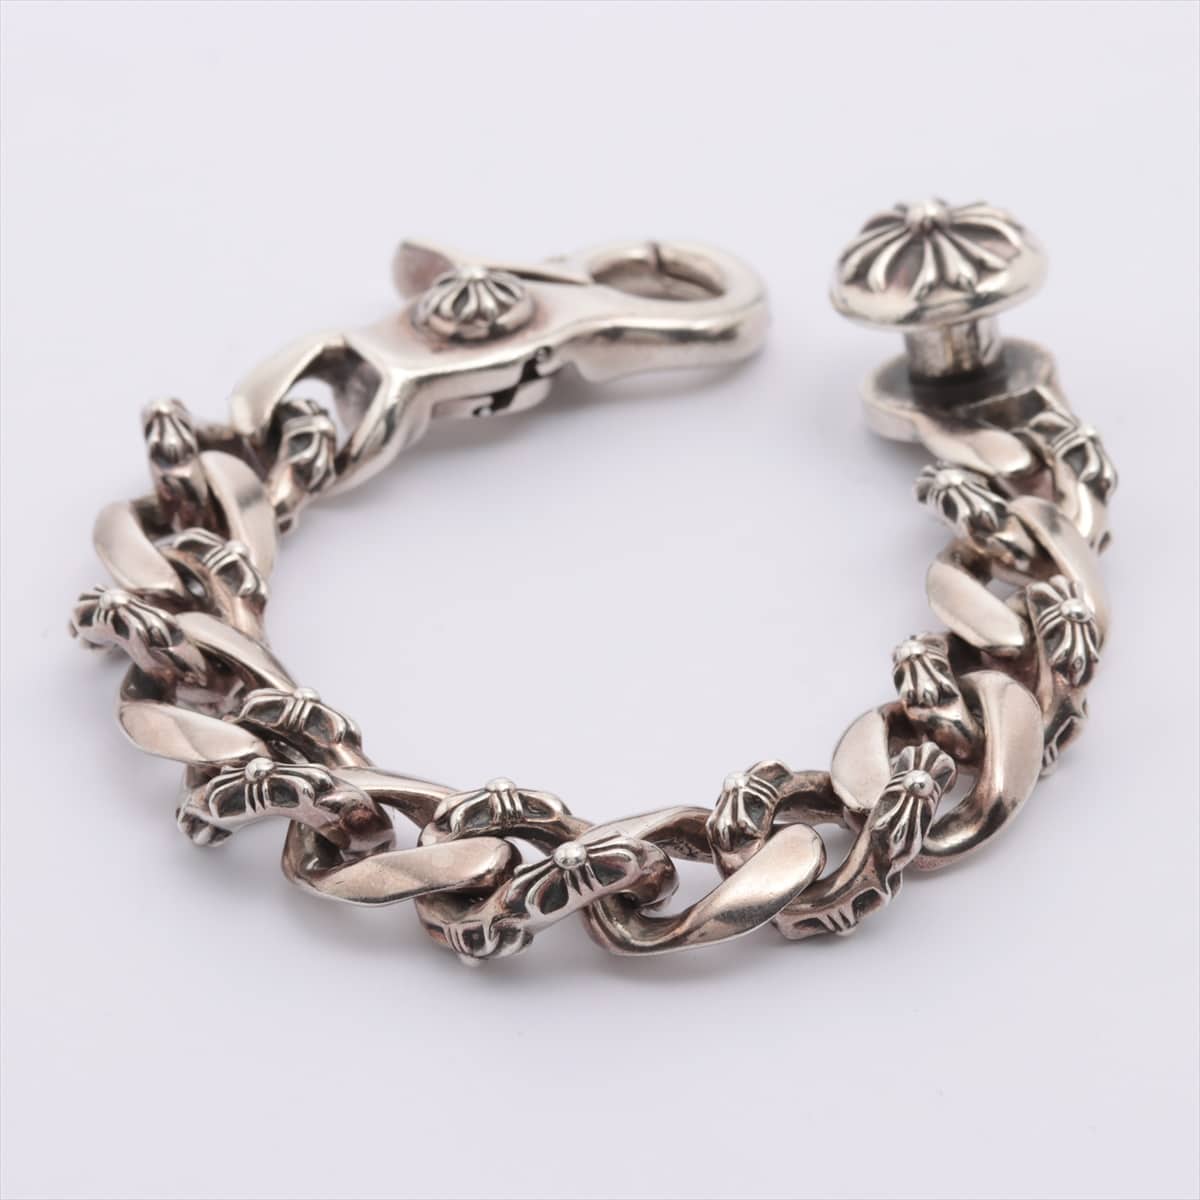 Chrome Hearts Fancy Link Chain Bracelet Bracelet 925 131.2g There are too many frames